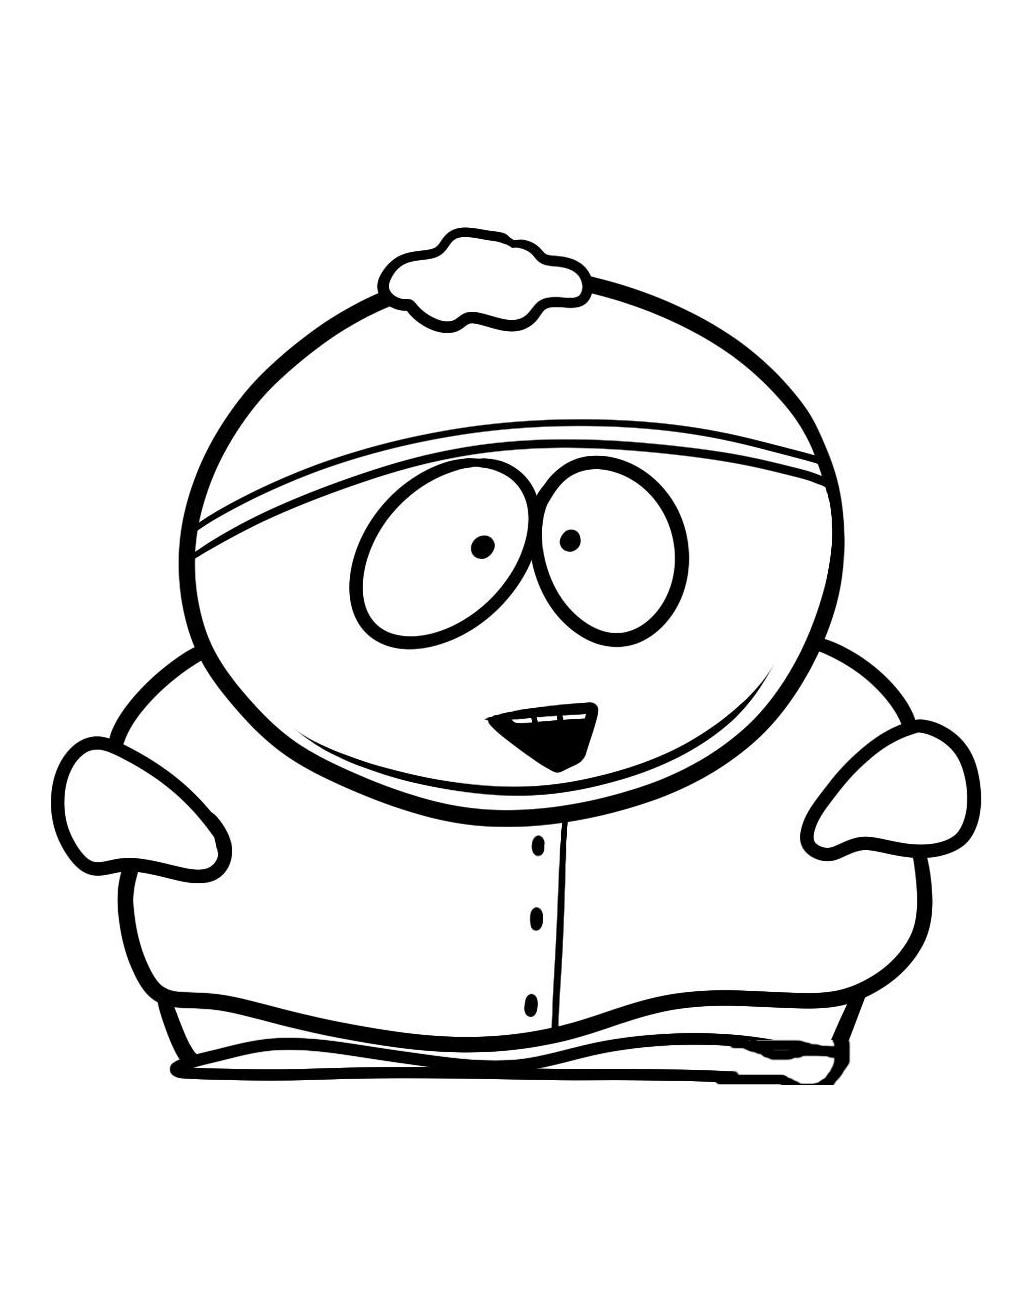 South Park For Children - South Park Kids Coloring Pages - Free Printable South Park Coloring Pages